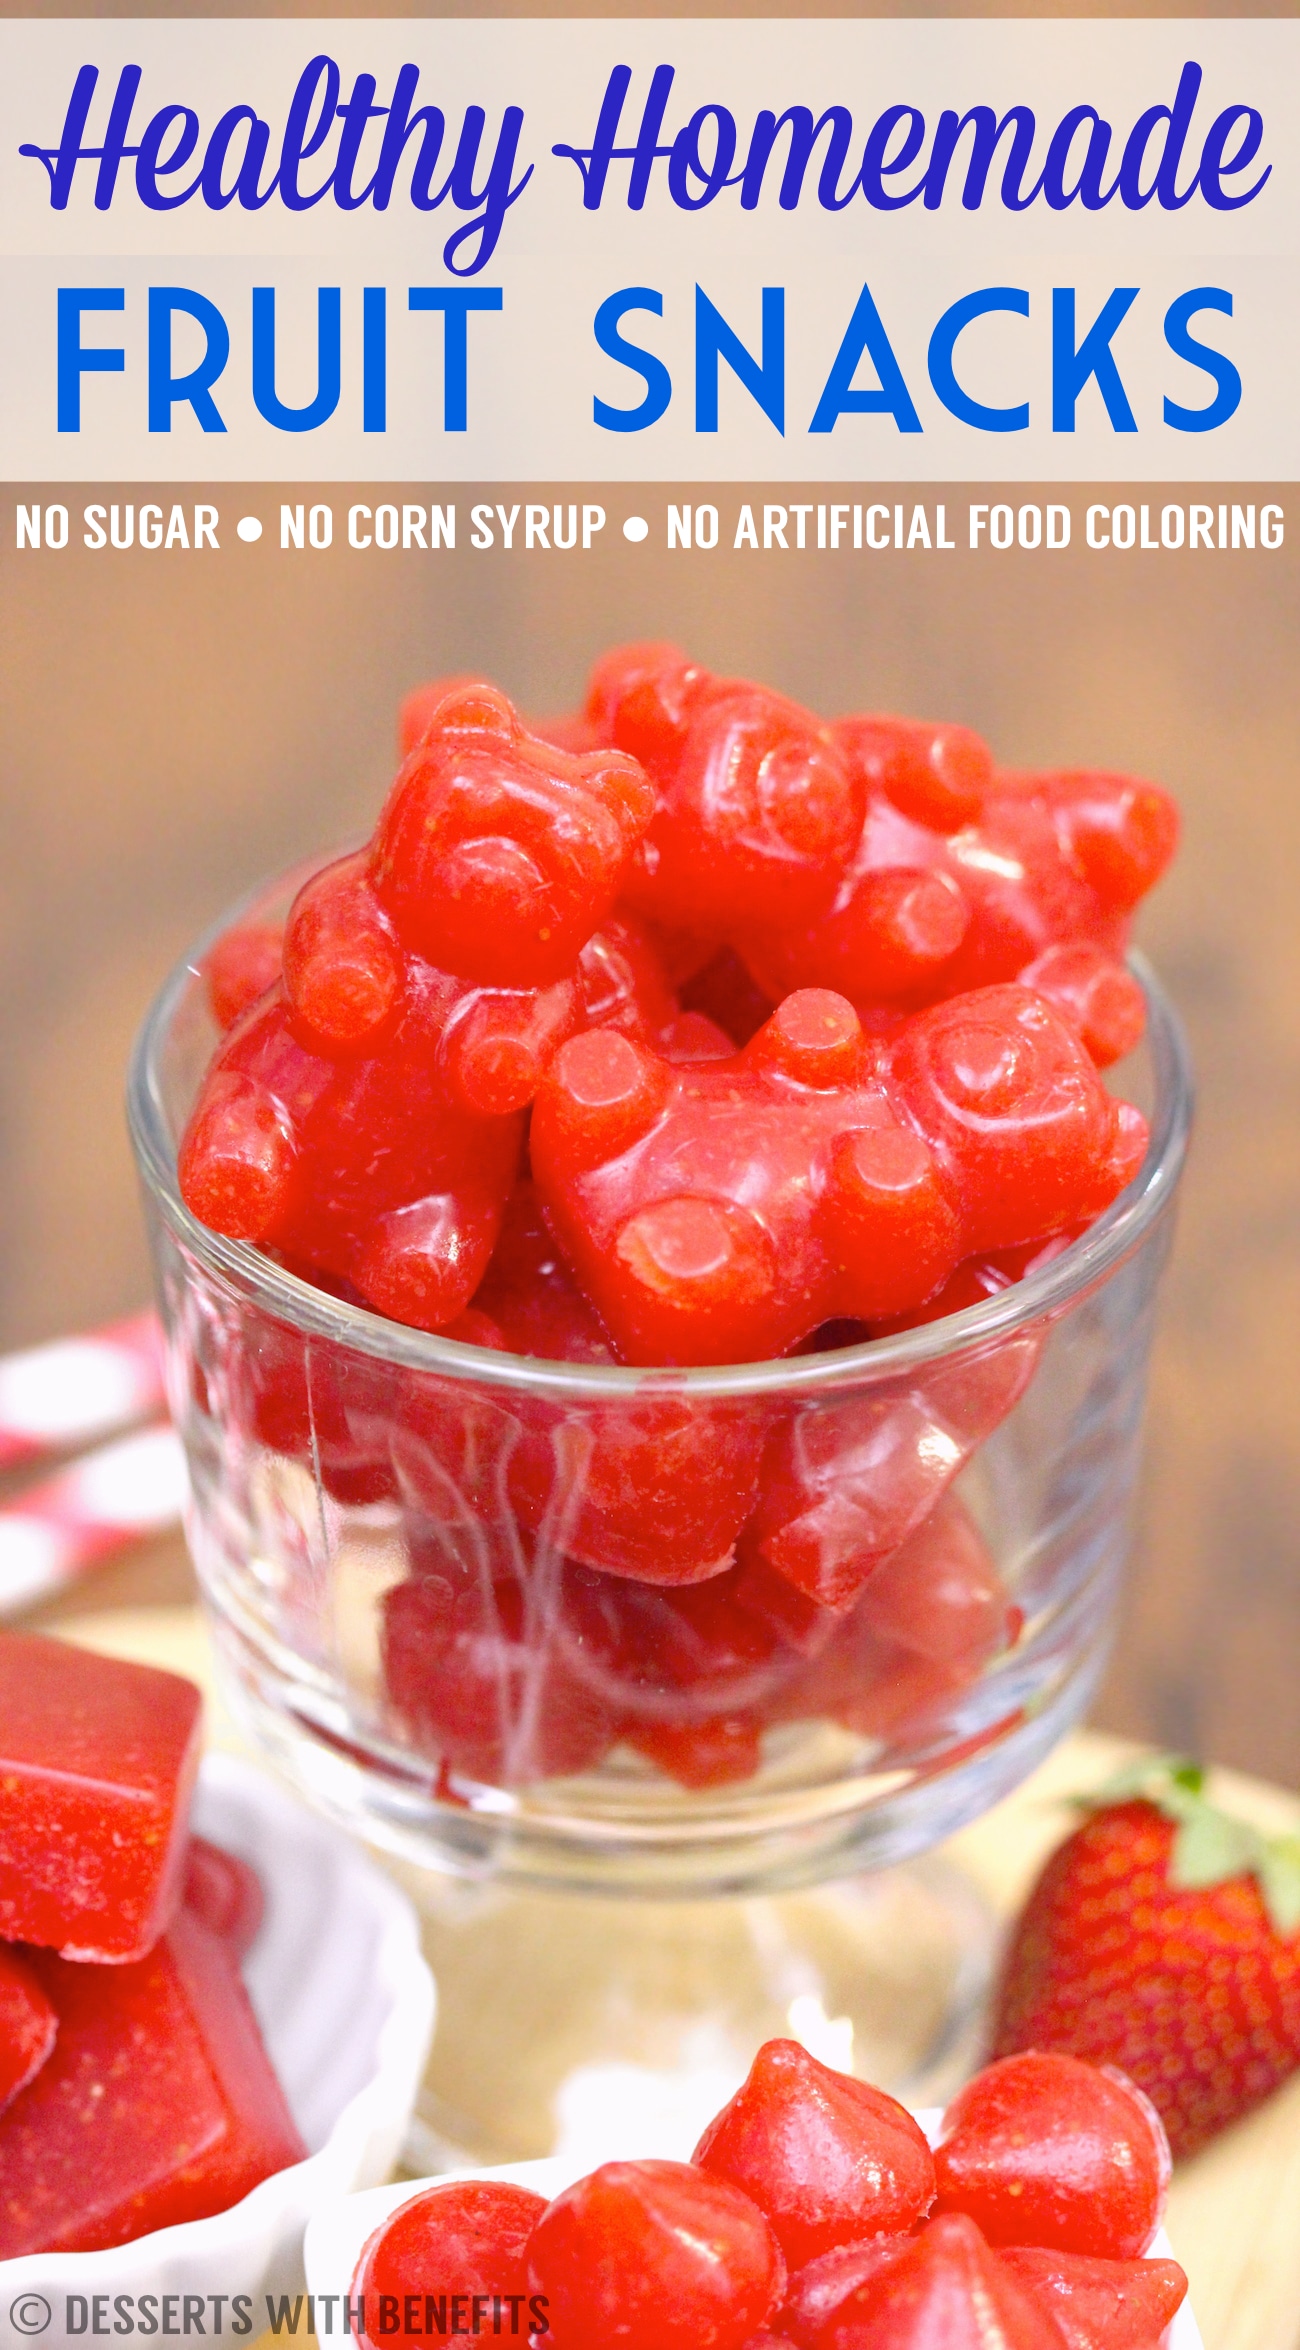 These Healthy Homemade Fruit Snacks taste just like the storebought version, except these are BETTER, made all natural, fat free, sugar free, and low carb! -- Healthy Dessert Recipes at the Desserts With Benefits Blog